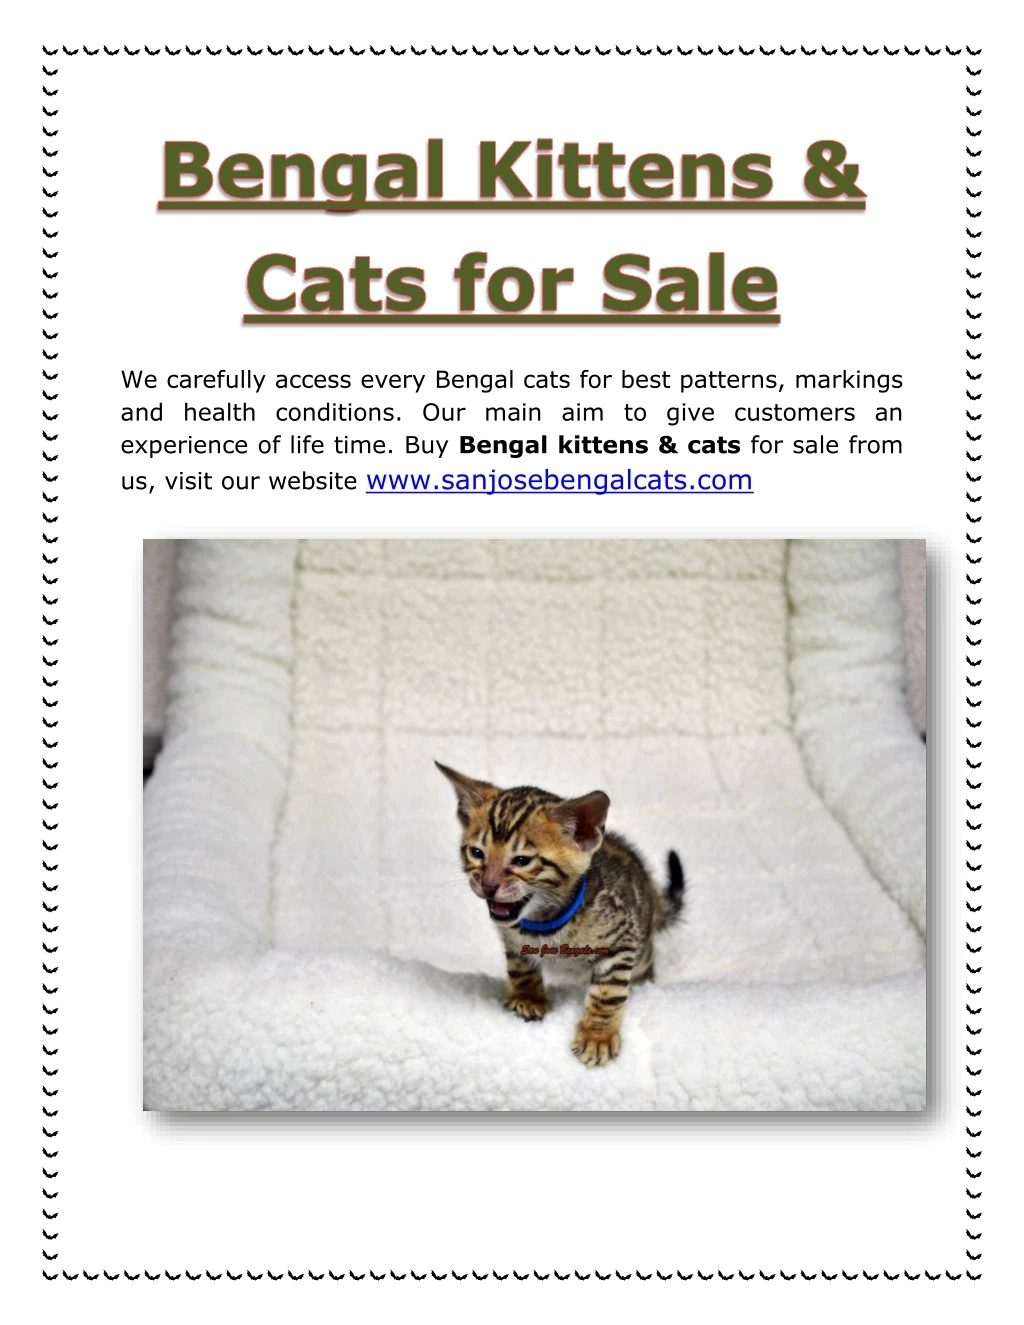 we carefully access every bengal cats for best